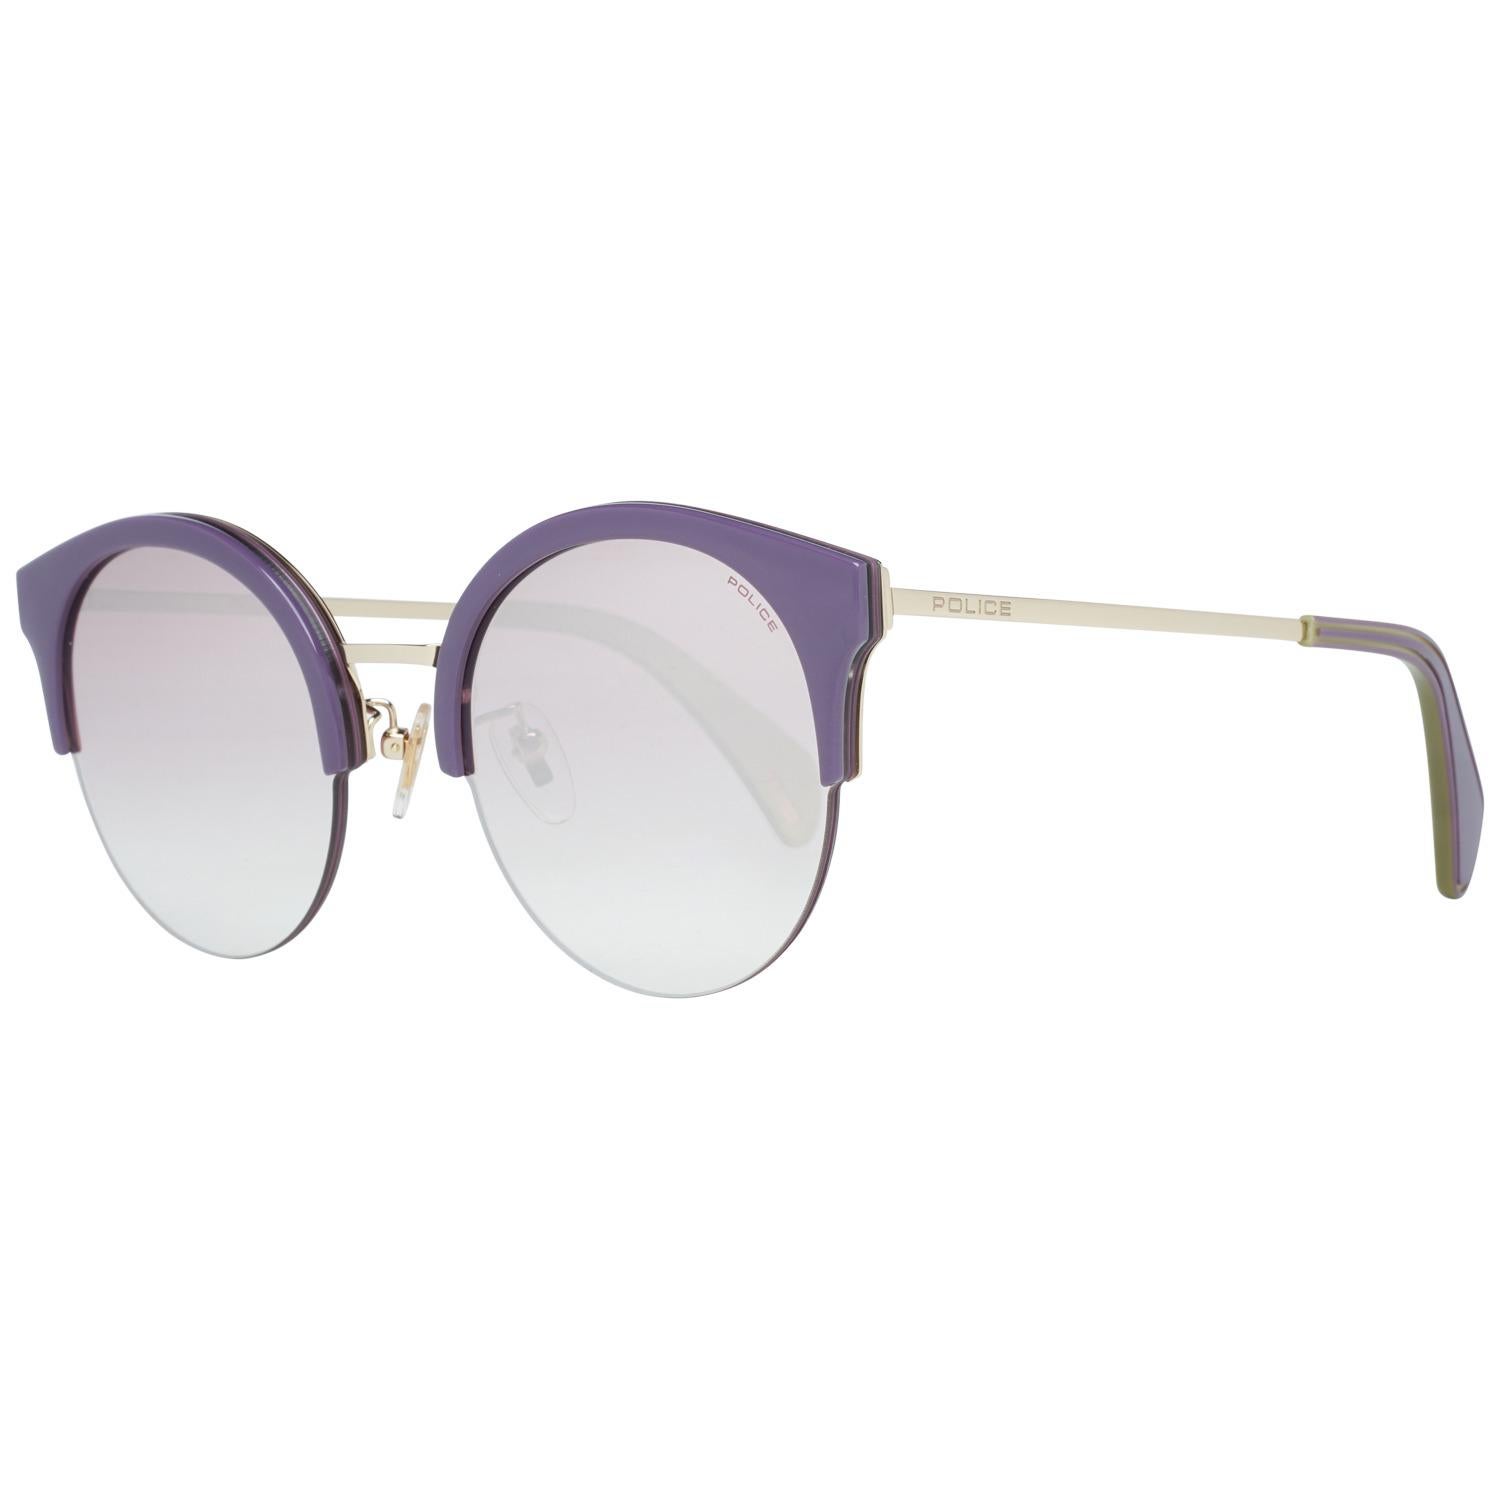 Details
MATERIAL: Metal
COLOR: Gold
MODEL: SPL615 61300X
GENDER: Women
COUNTRY OF MANUFACTURE: China
TYPE: Sunglasses
ORIGINAL CASE?: Yes
STYLE: Round
OCCASION: Casual
FEATURES: Lightweight
LENS COLOR: RosÃ© Gold
LENS TECHNOLOGY: Mirrored
YEAR